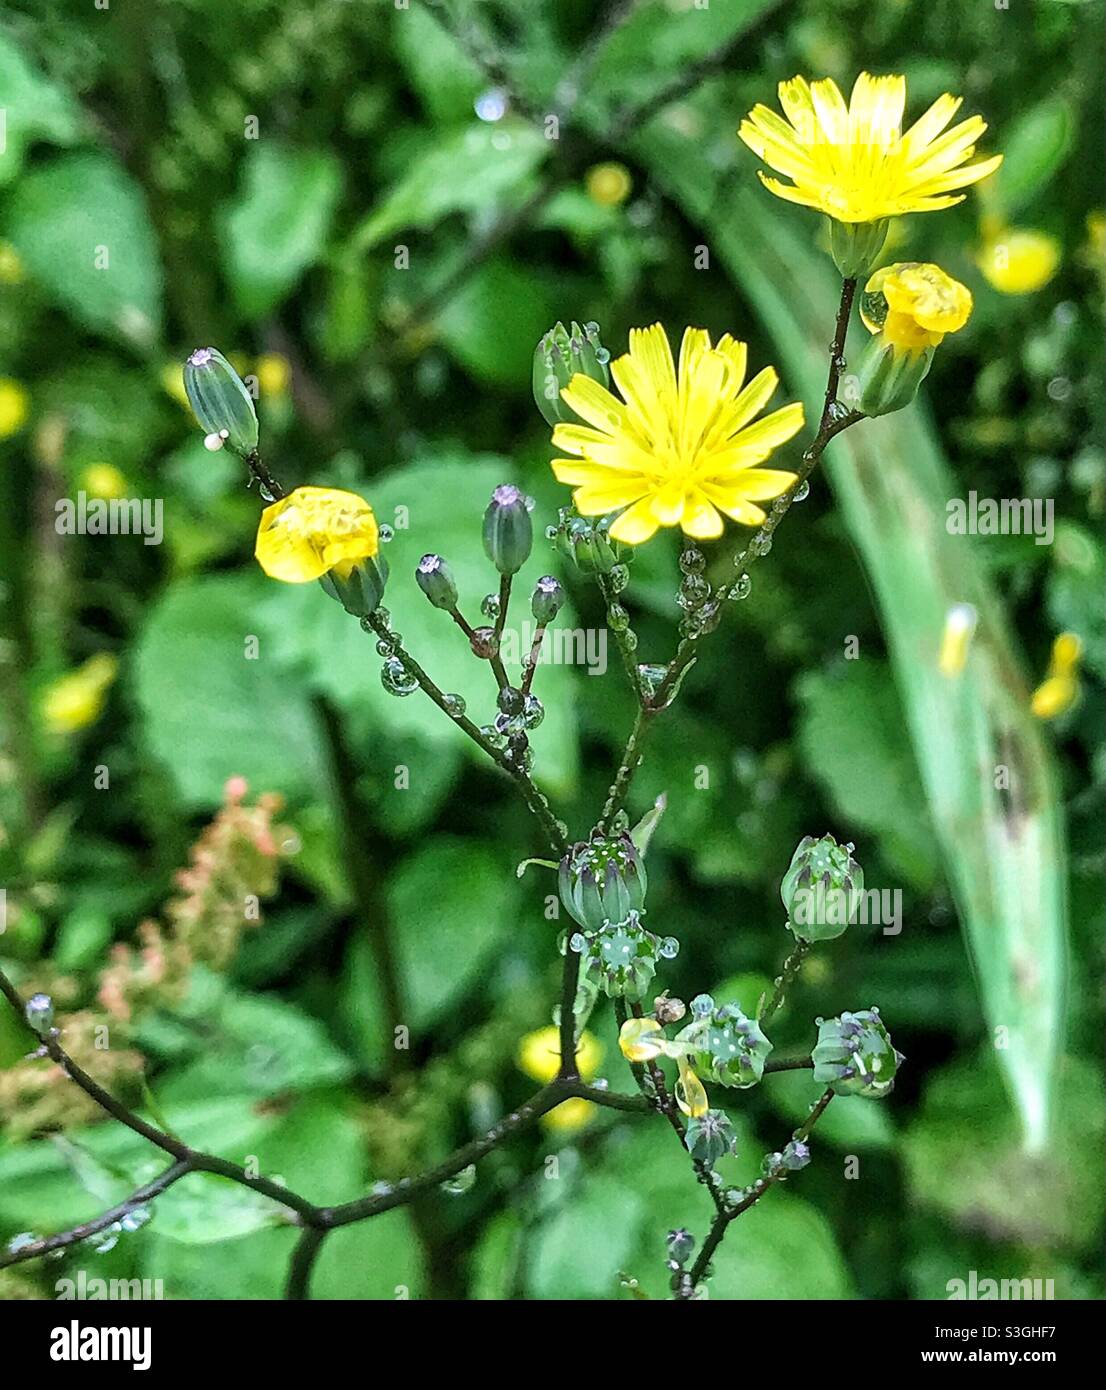 The common Nipplewort plant. An unfortunate name for a beautiful flower. Stock Photo